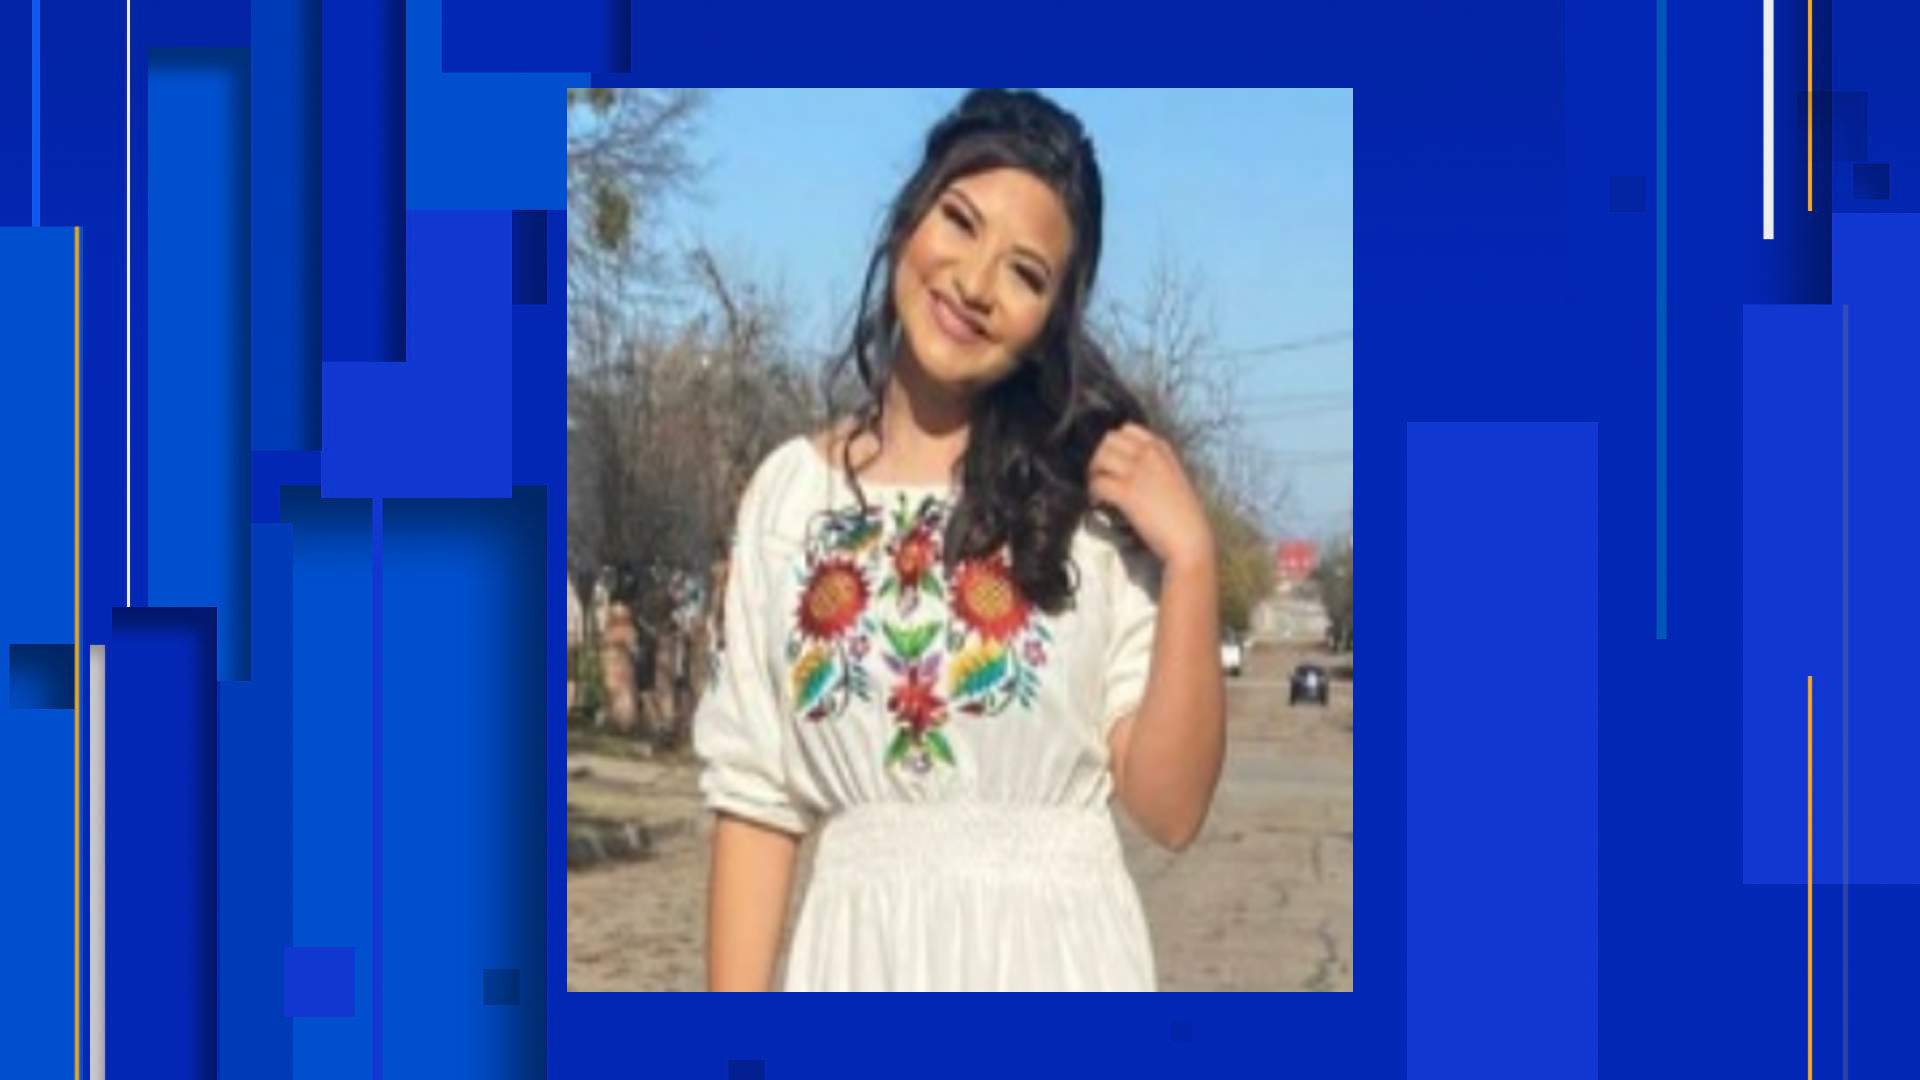 Search discontinued for missing teen in Waco, police say